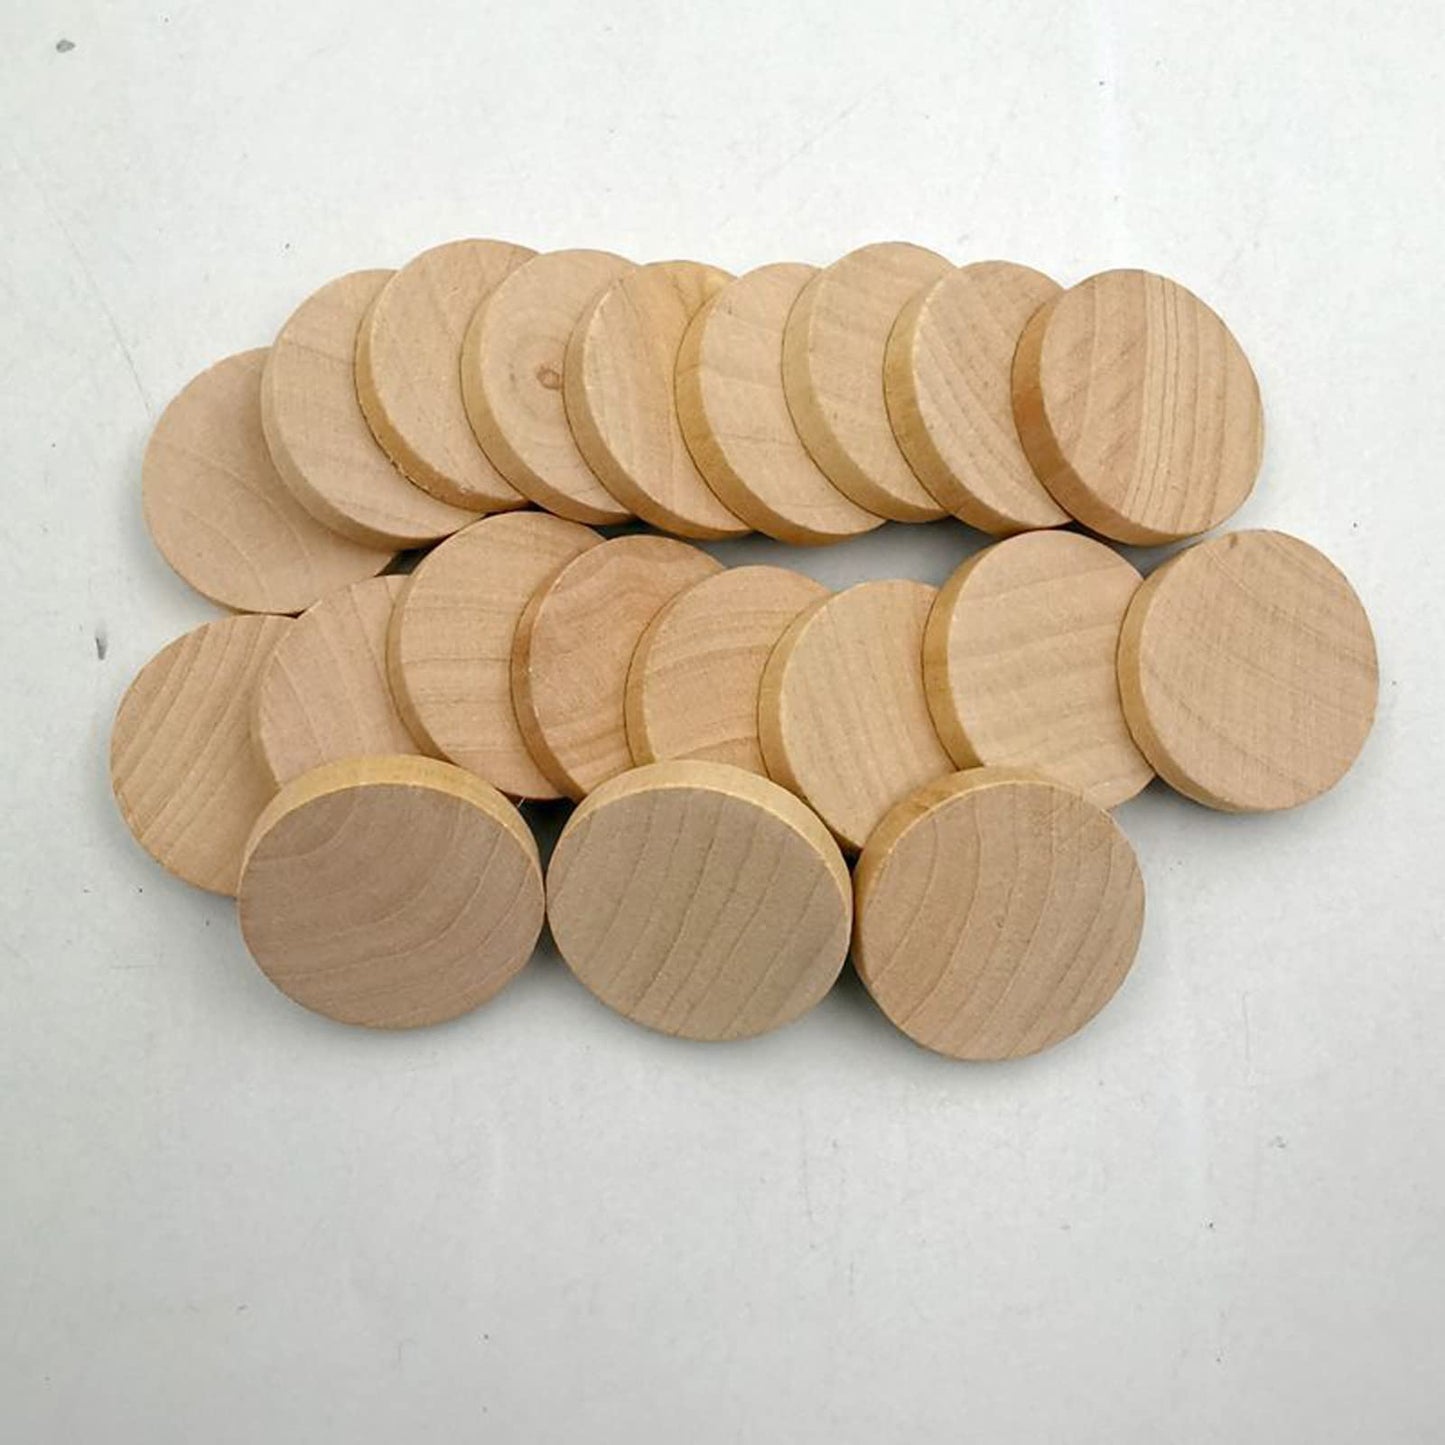 50 Pcs 1 Inch Natural Wood Slices Unfinished Round Wood Coins,Round Wooden Discs Circles,Natural Unfinished Wood Plaque for DIY Arts & Crafts